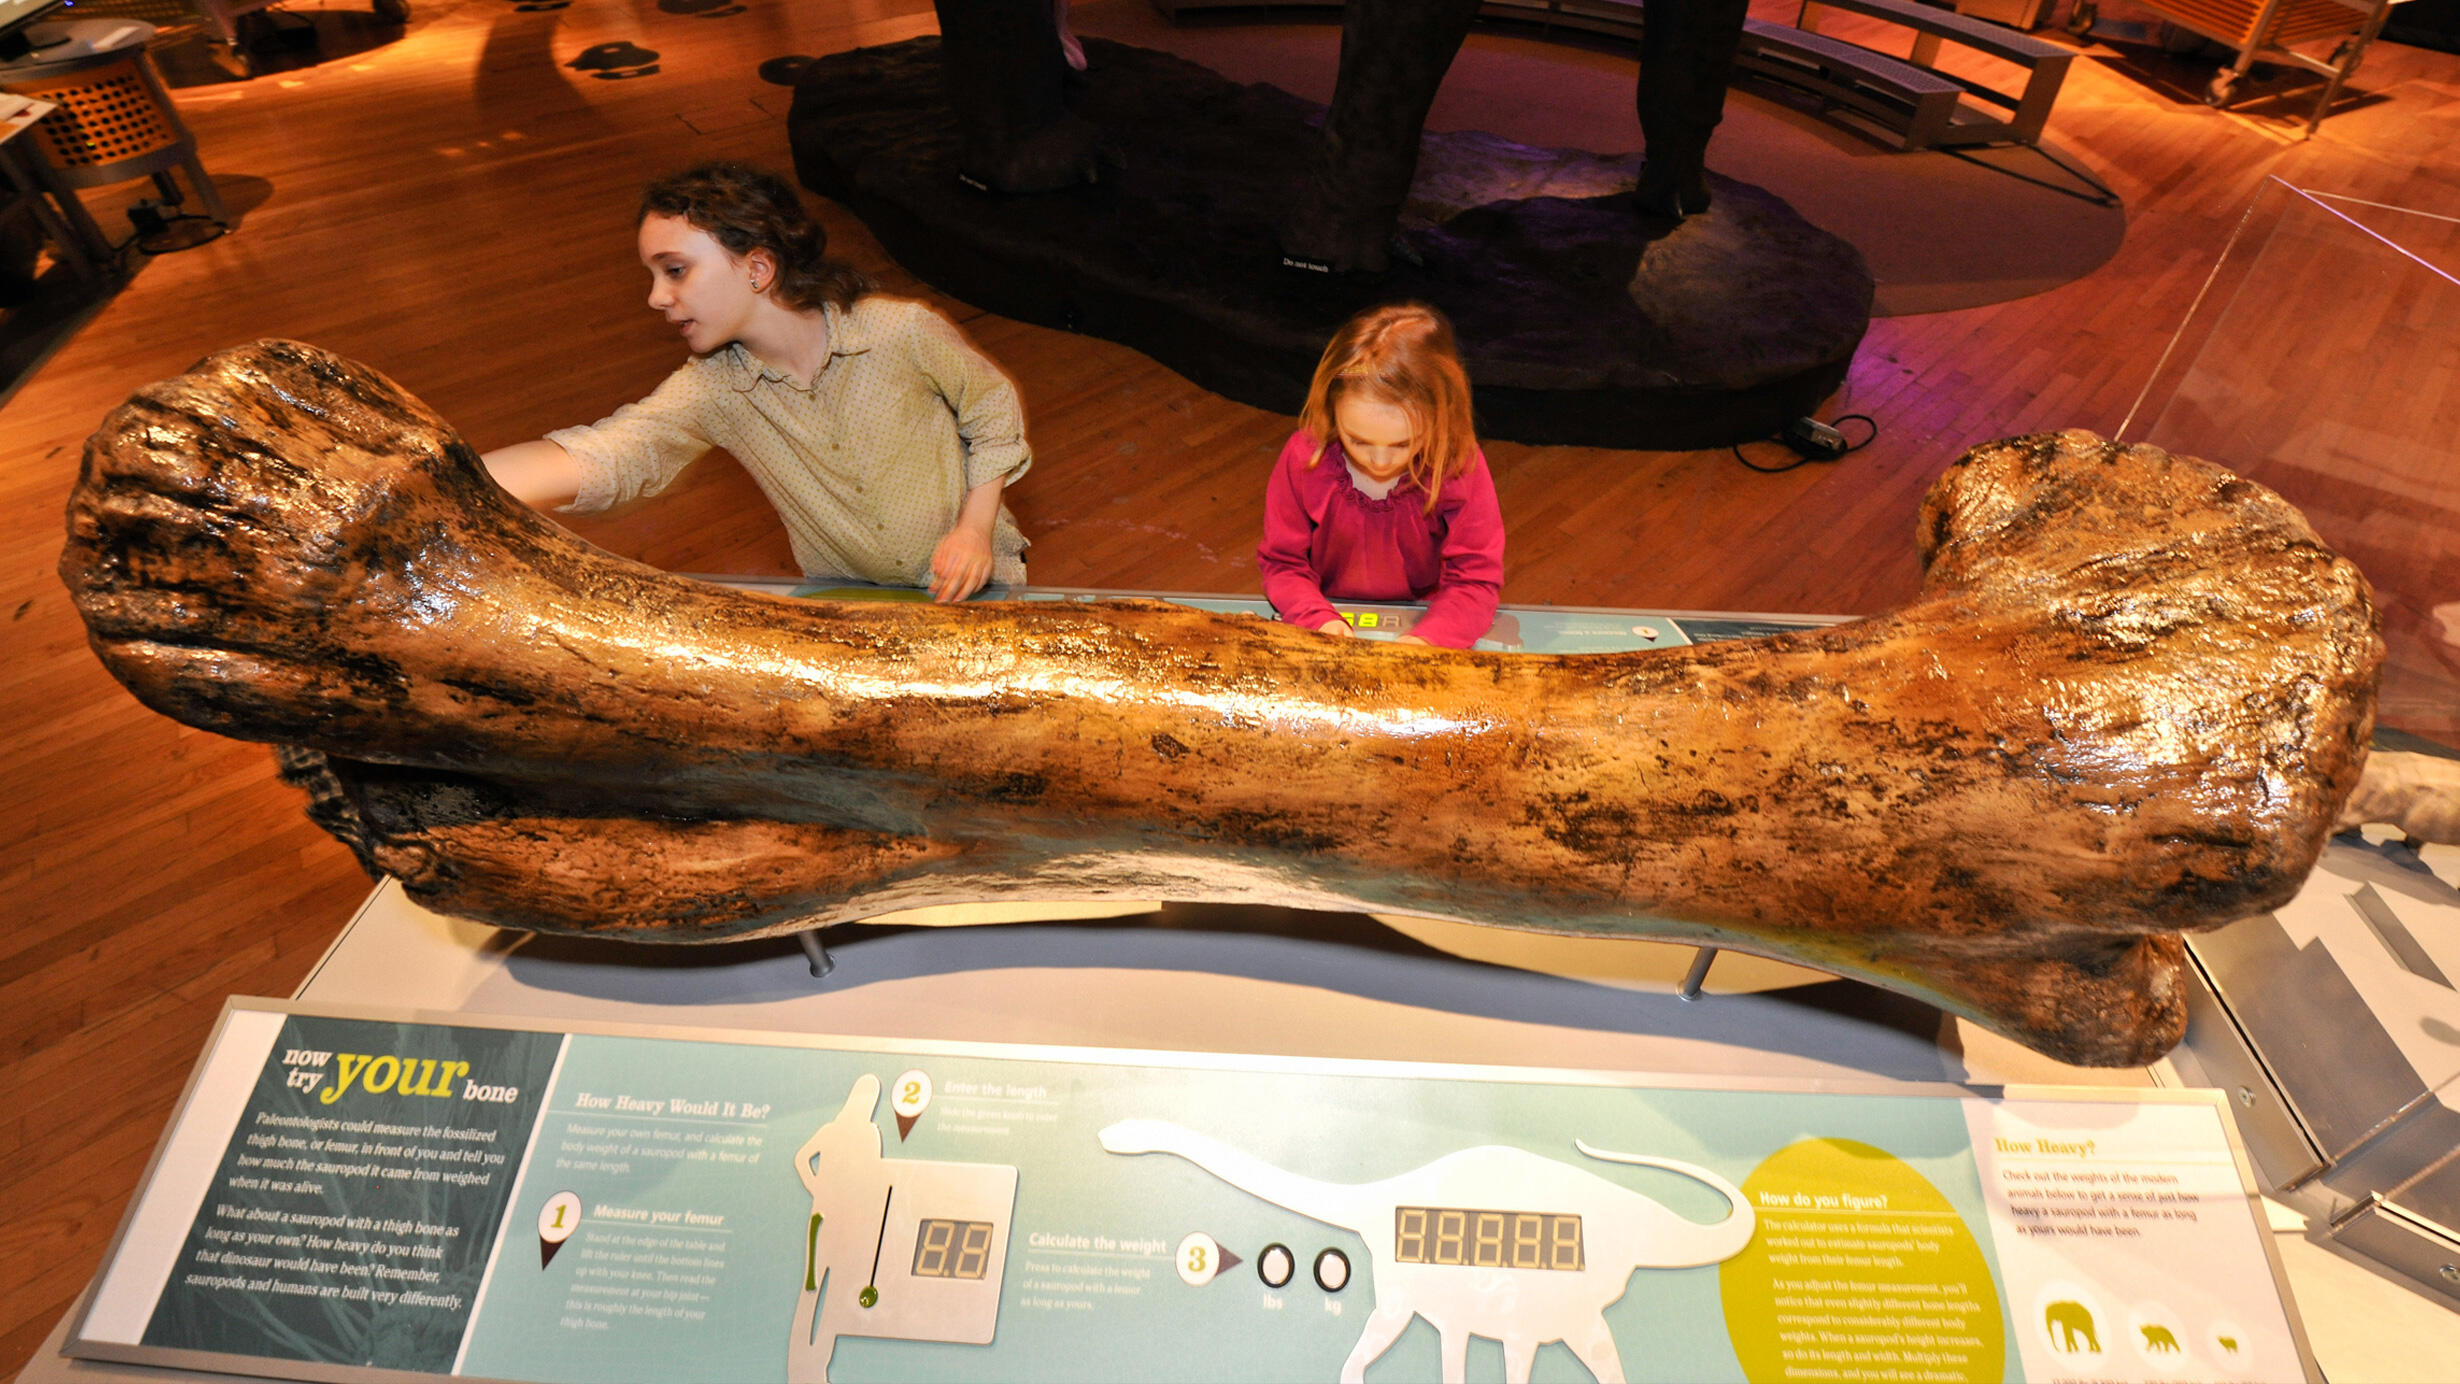 Viewed from above, two young girls measure a giant dinosaur femur bone that is many times larger than they are